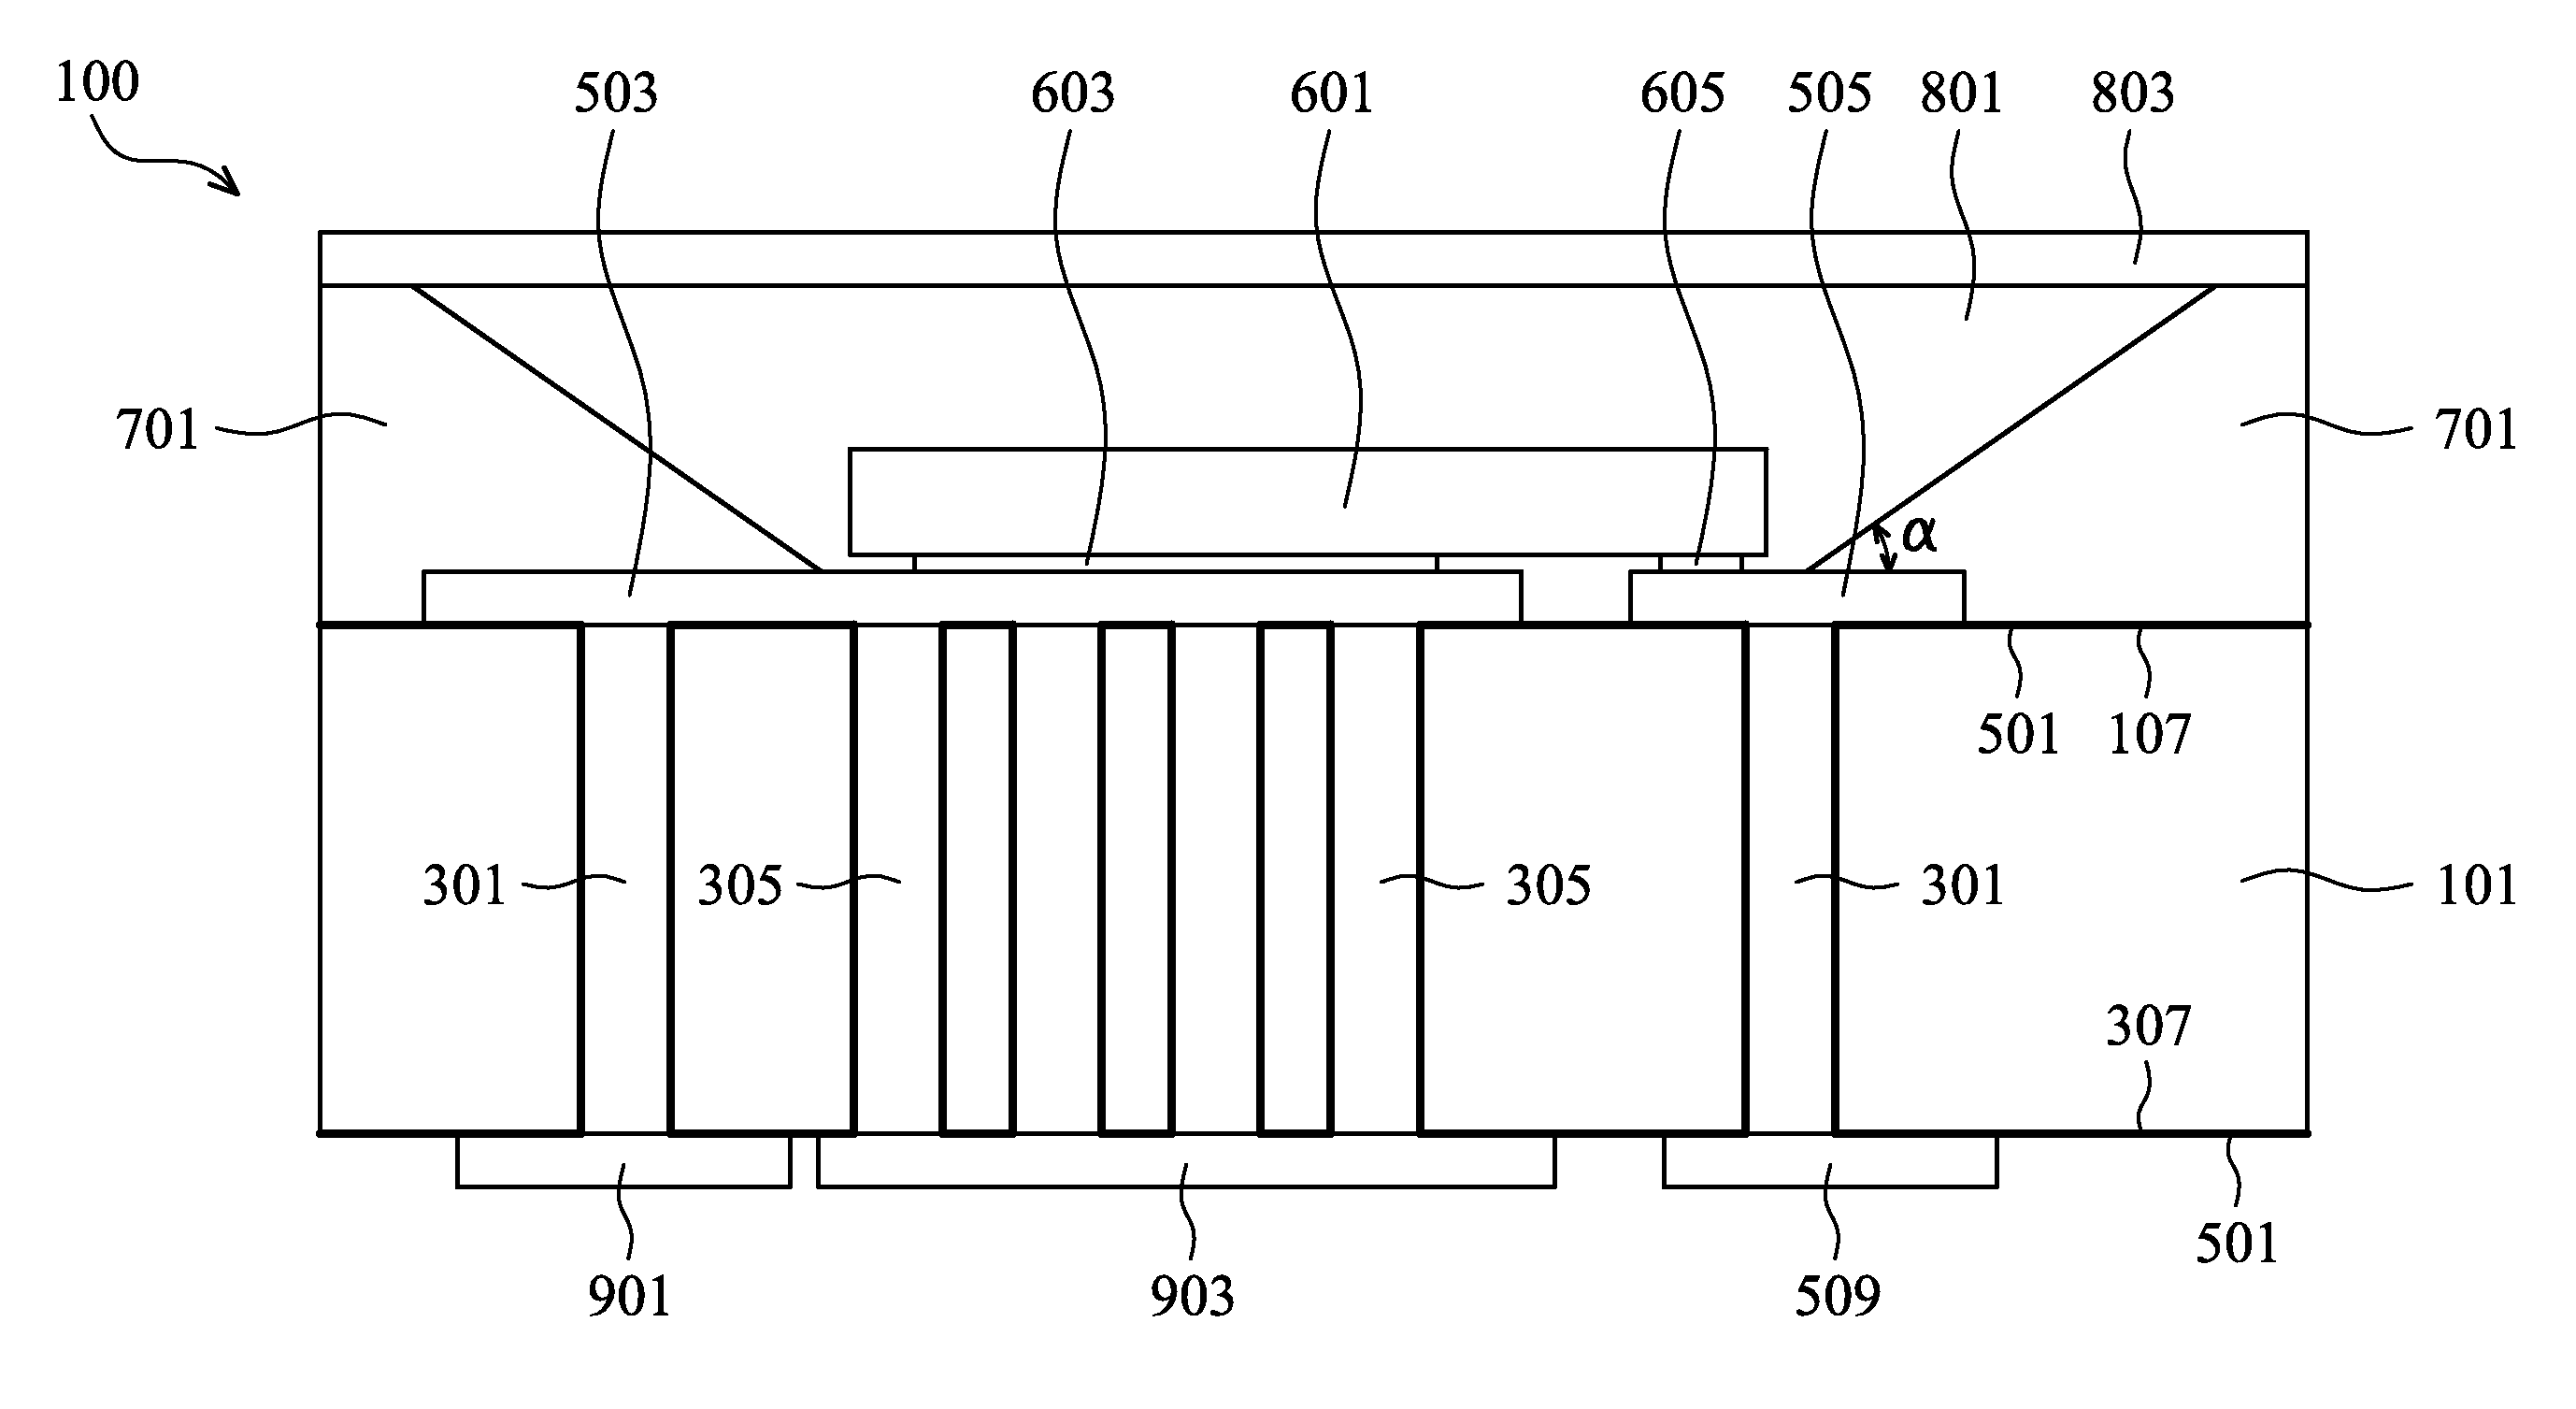 LED Package Structure and Fabrication Method